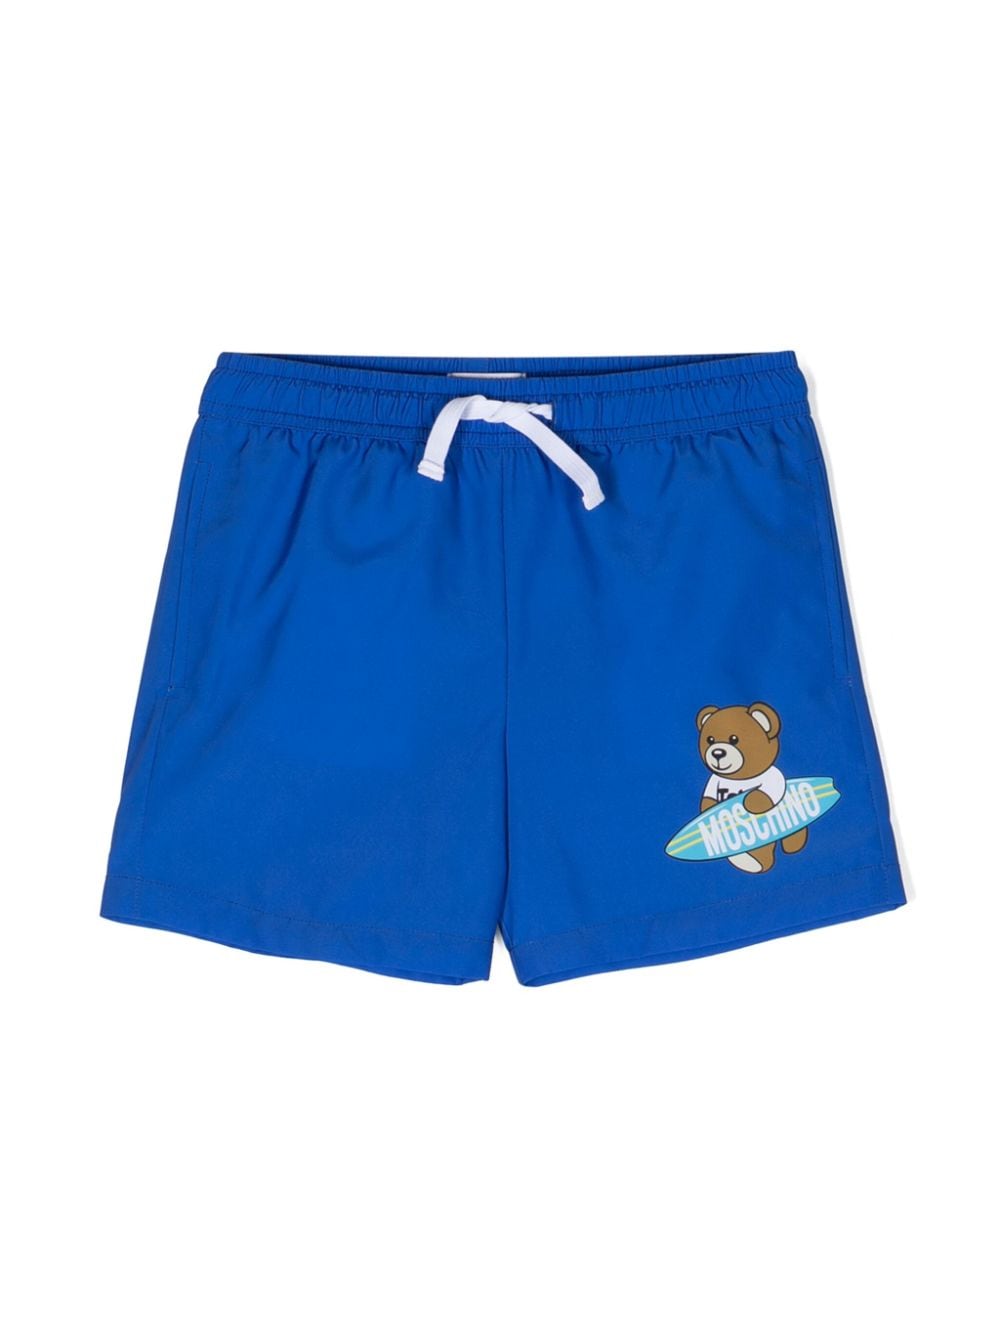 Blue swim shorts for boys with print